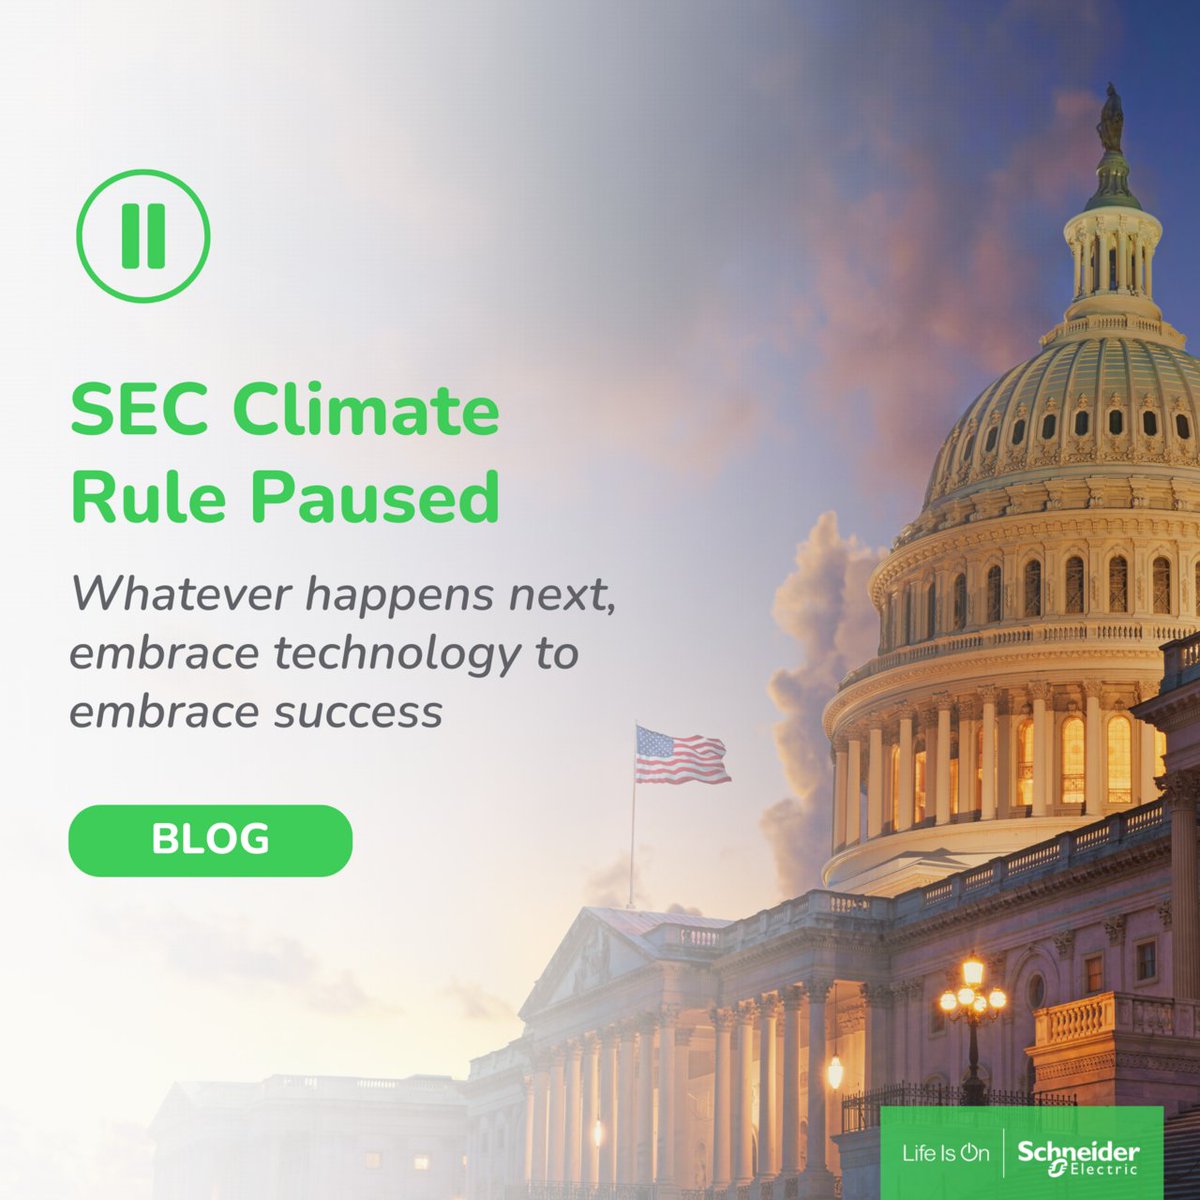 The SEC Climate Rule may be paused, but procrastinating compliance is not what we recommend. It's clear that corporate transparency and environmental accountability continues to gain traction around the world, the United States included. Even though the